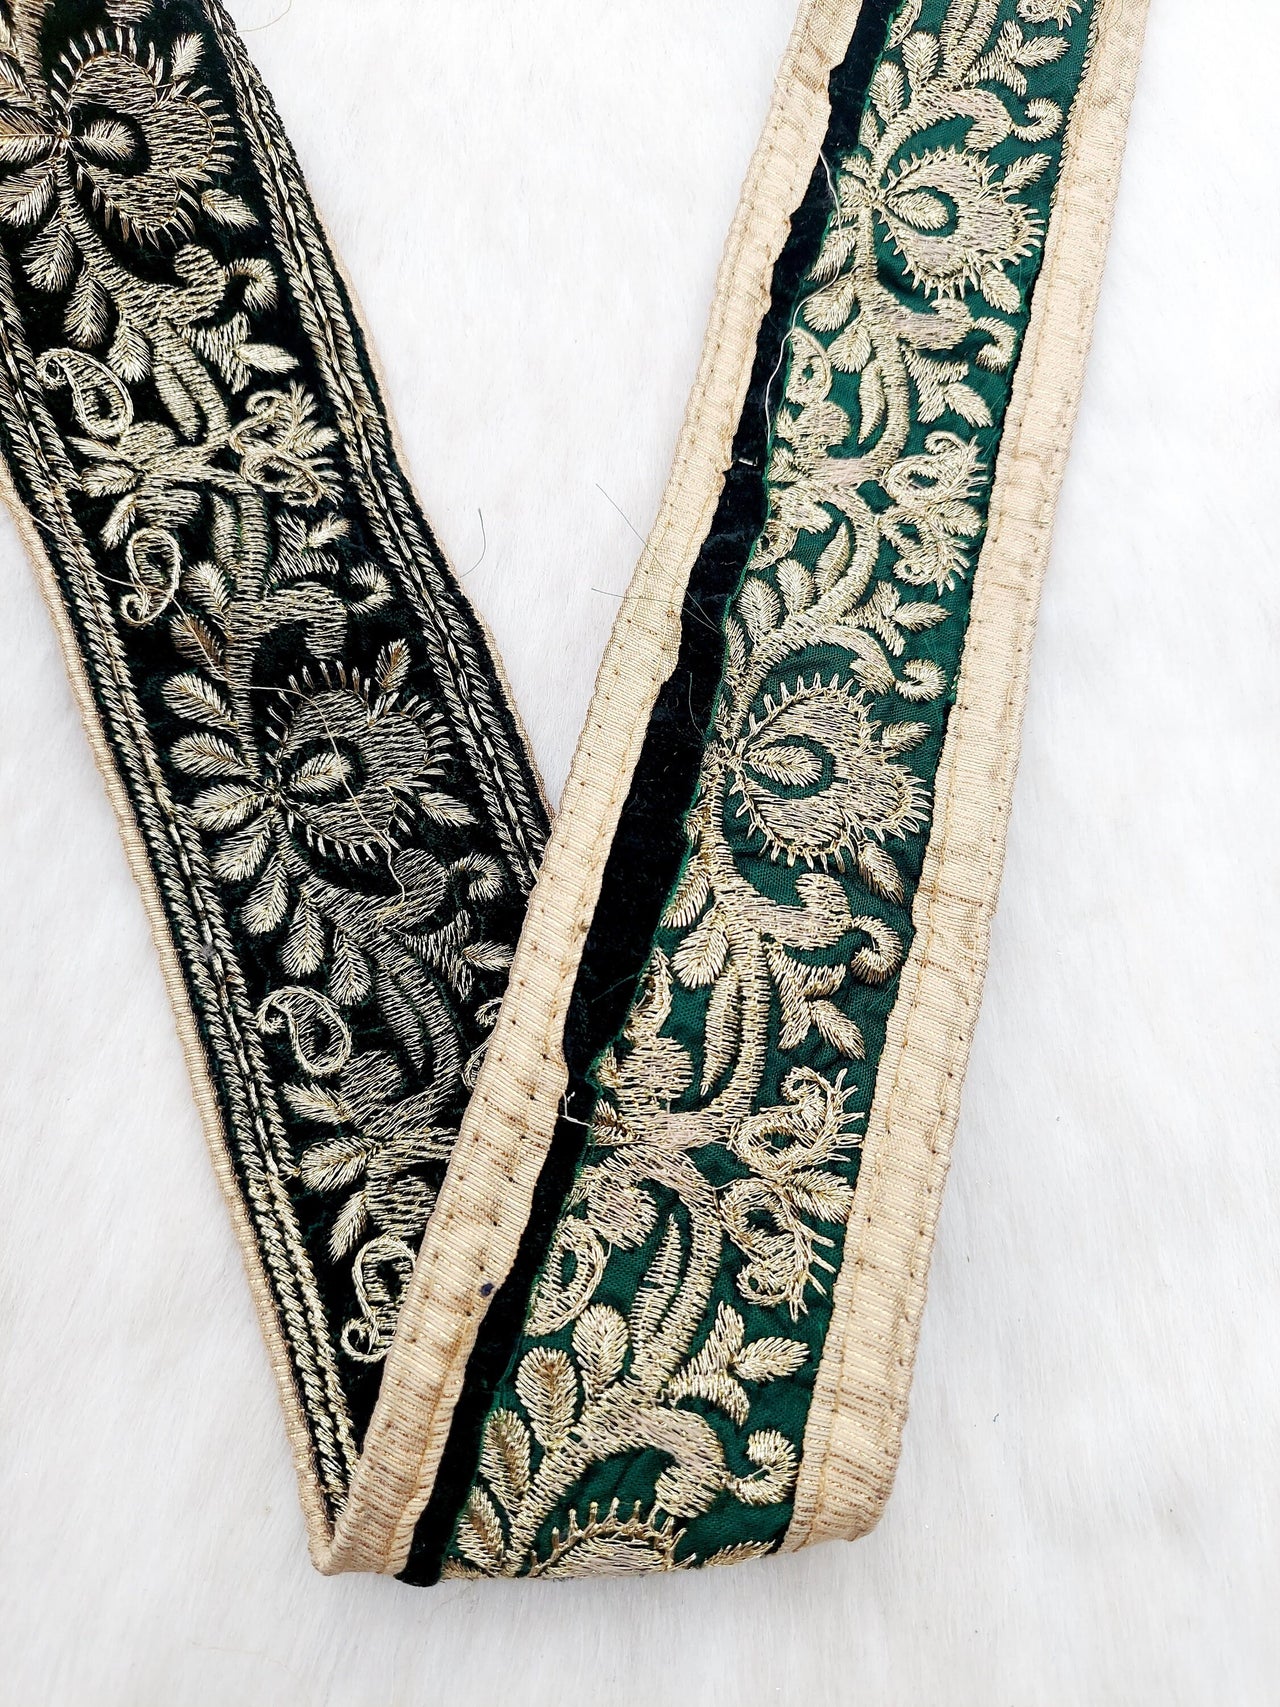 Dark Green Velvet Trim In Gold Floral Embroidery, Trim By Yard | 9 Yards, Decorative Trimming, Embroidered Trim